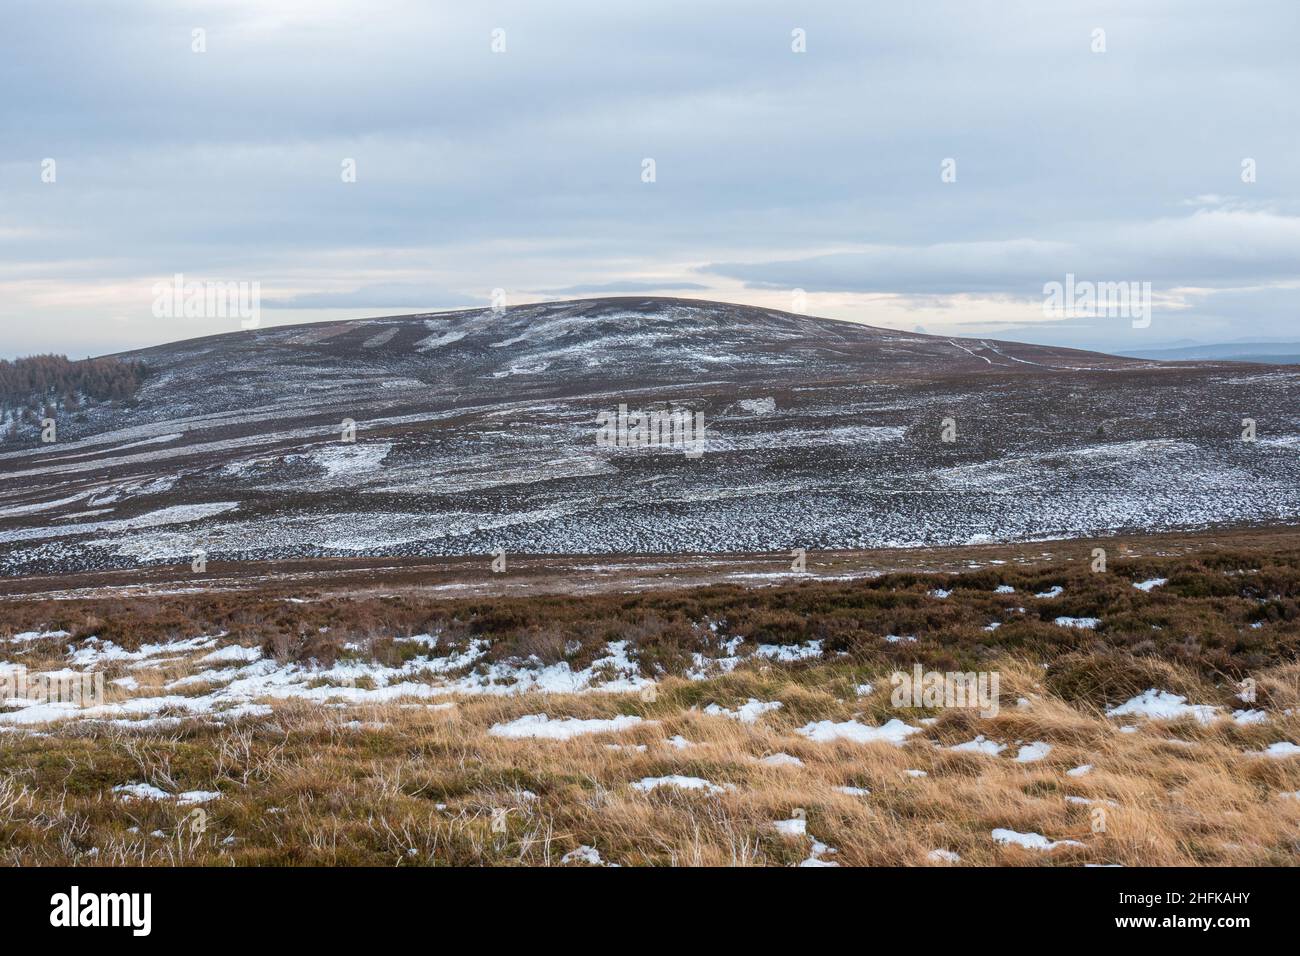 Lord Arthur's Hill in the Correen Hills near Alford, Aberdeenshire, Scotland Stock Photo